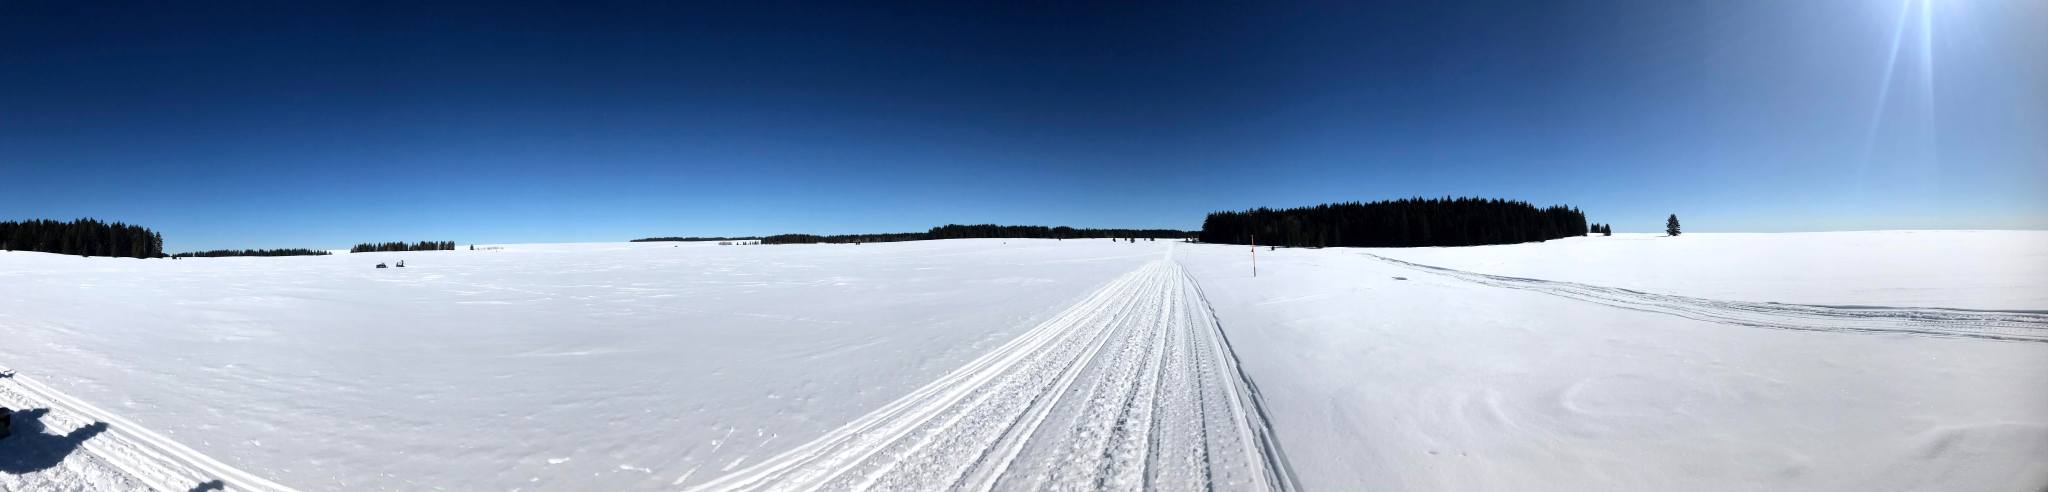 A panoramic photo of a snowy landscape under a bright blue sky. Snowmobile tracks curve across the center of the image, and two tiny people on snowmobiles are visible in the distance. Clumps of black evergreen trees appear near the horizon.